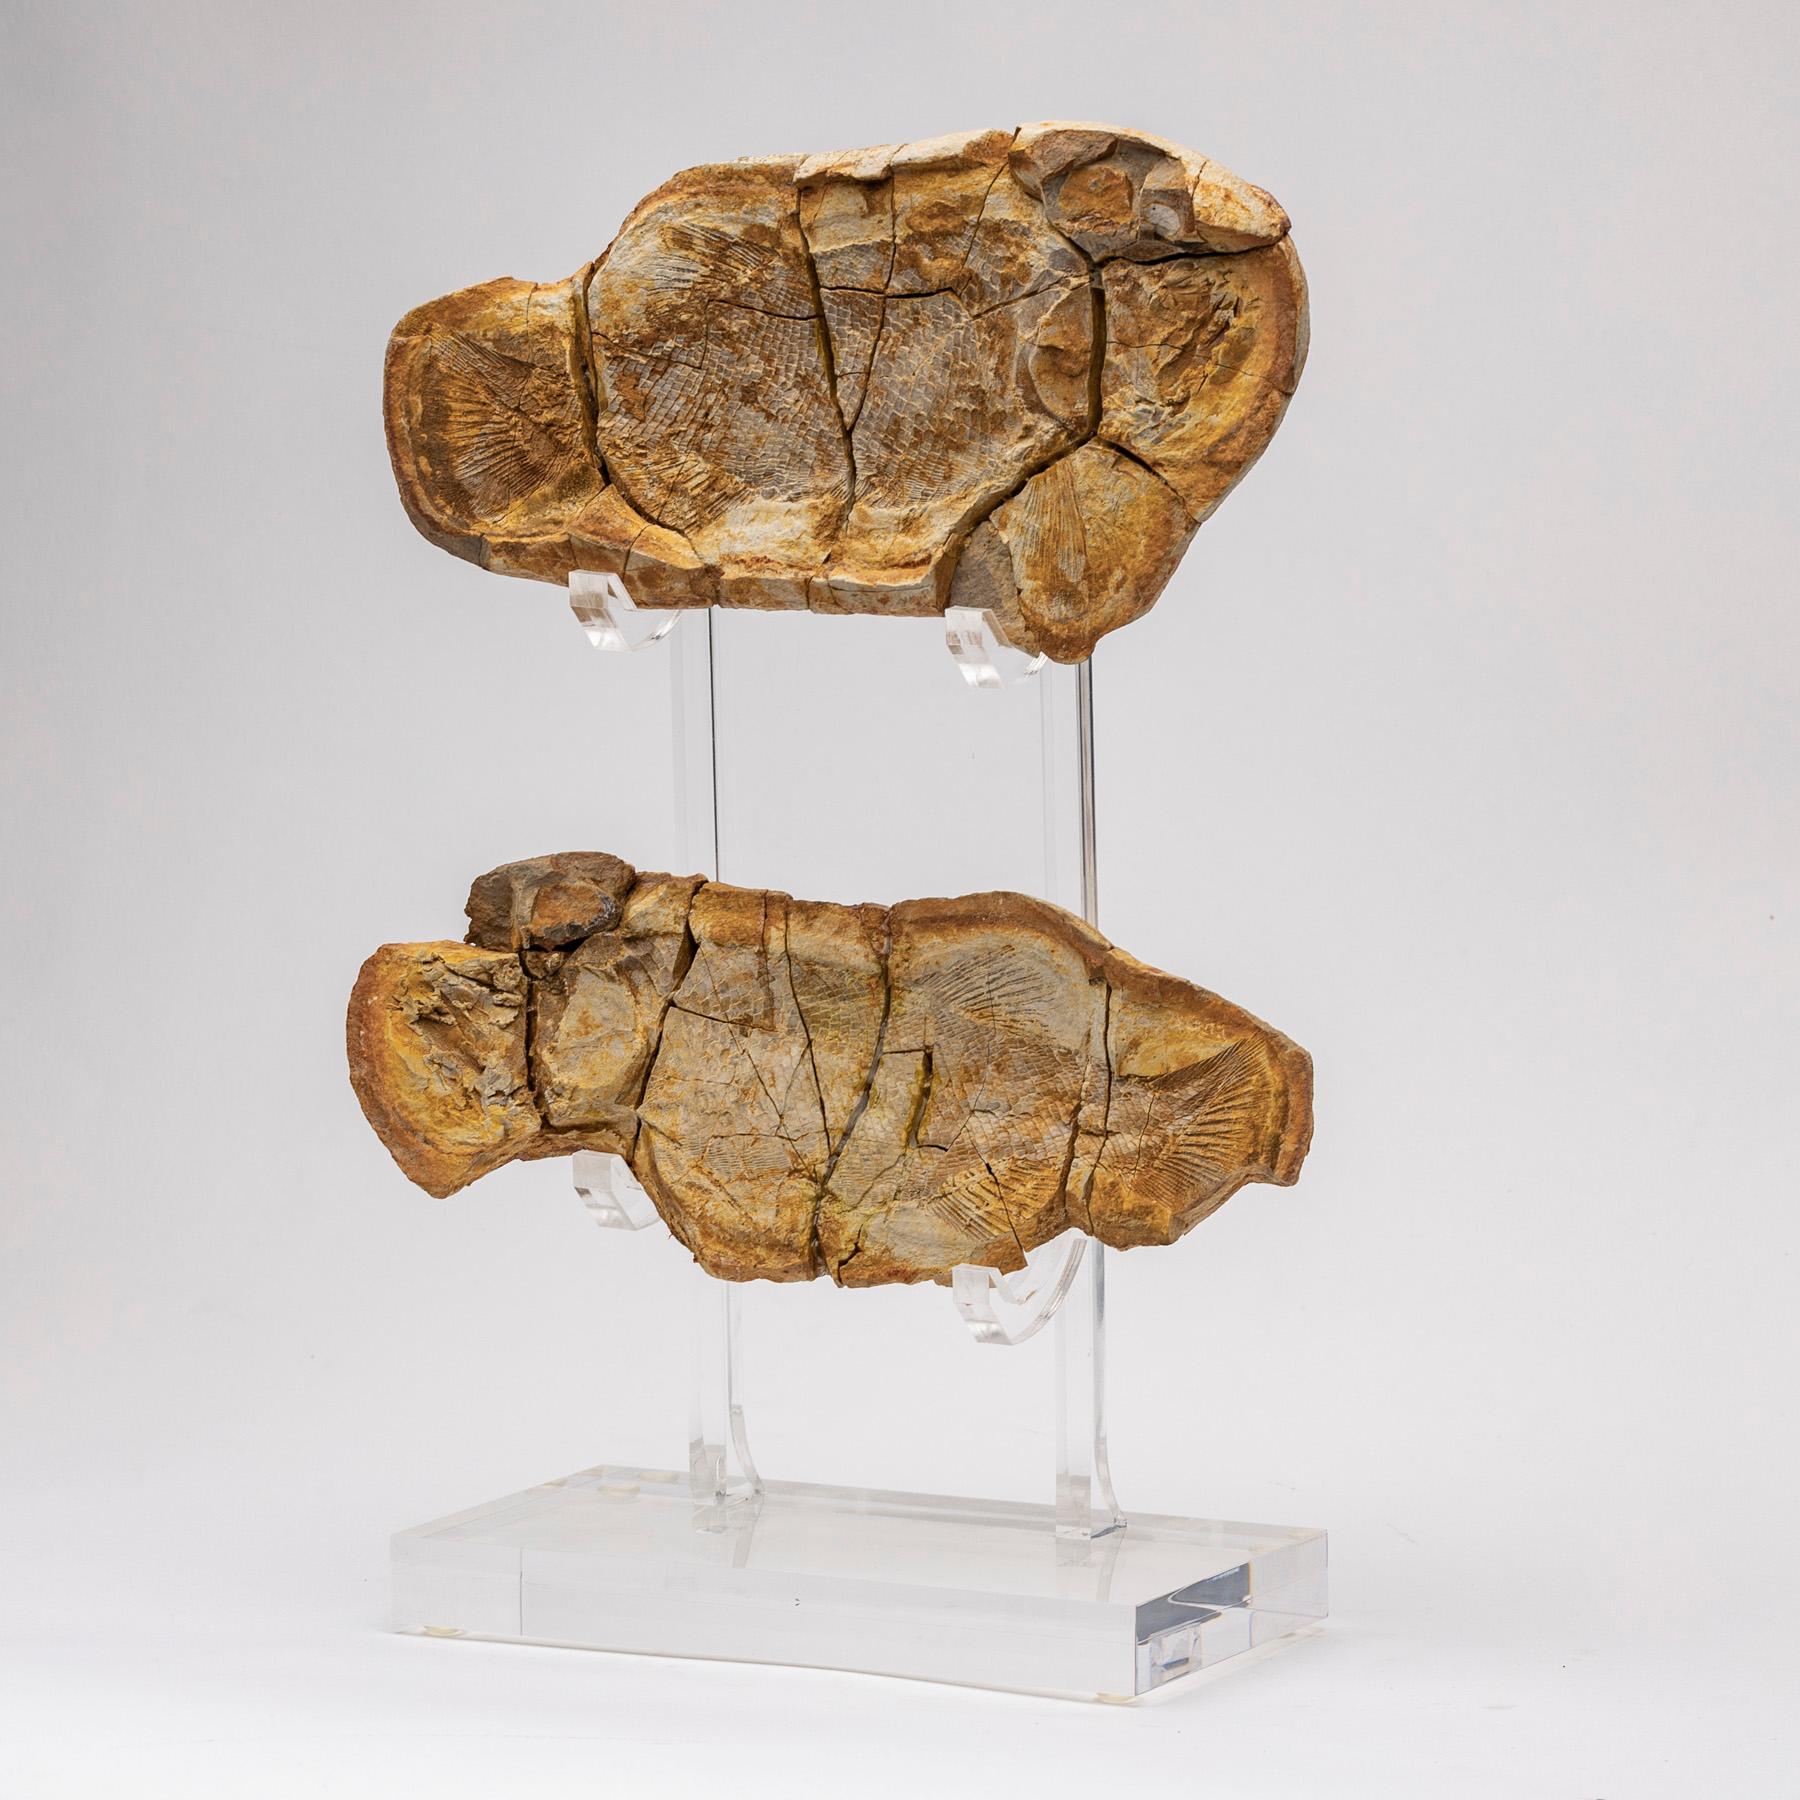 Triassic fossil fish are quote rare, and can only be found in certain locations.
This amazing preserved fish are found by cracking open the hard concretions and splitting the nodule in two 
It´s an extinct genus of prehistoric ray-finned fish that